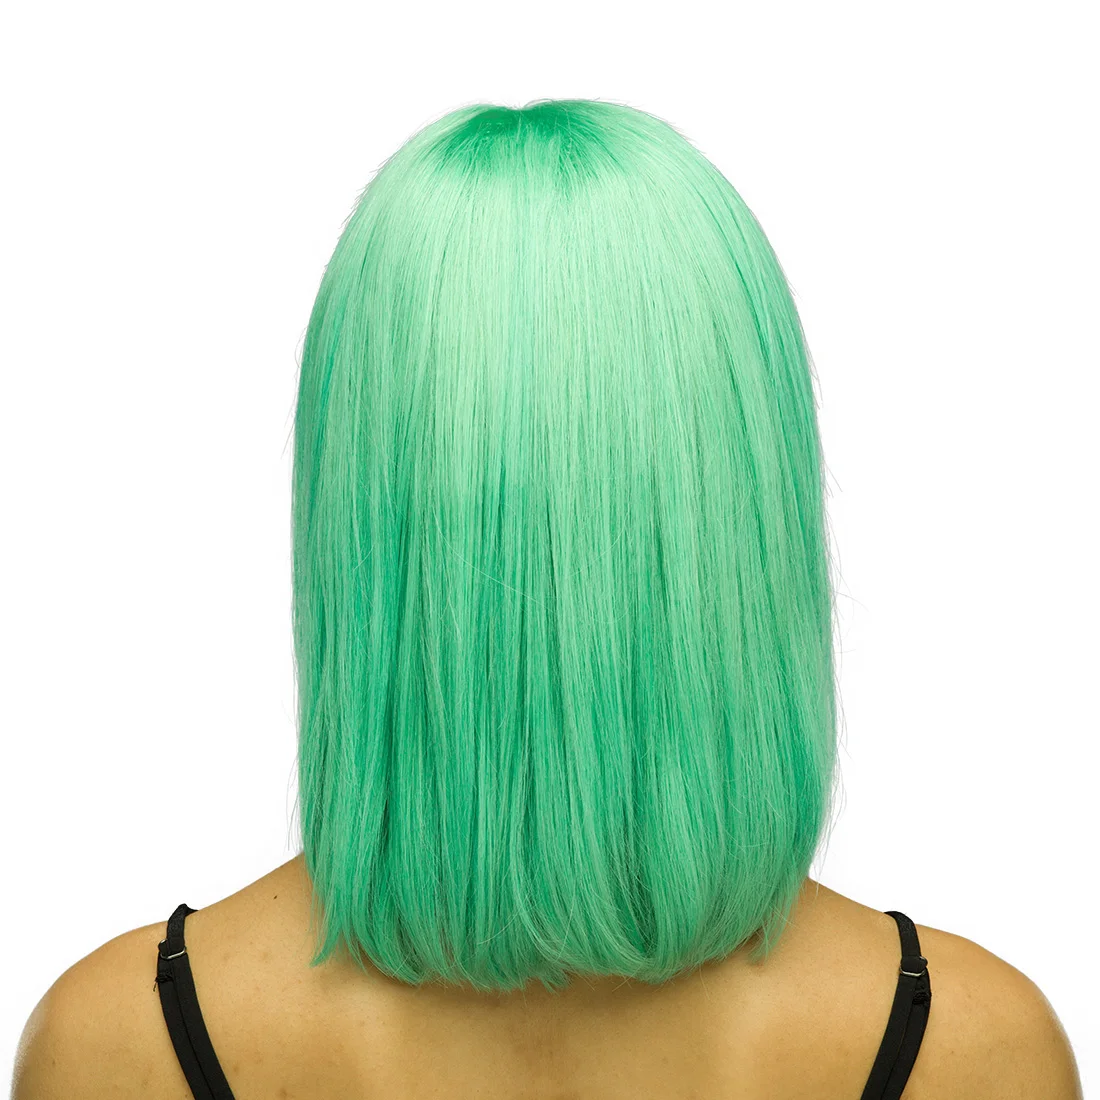 Korean Transparent color Lace Front Green Wig, 8 10 Inch Bob Wigs Sunnymay Human Hair Wigs With Elastic Band